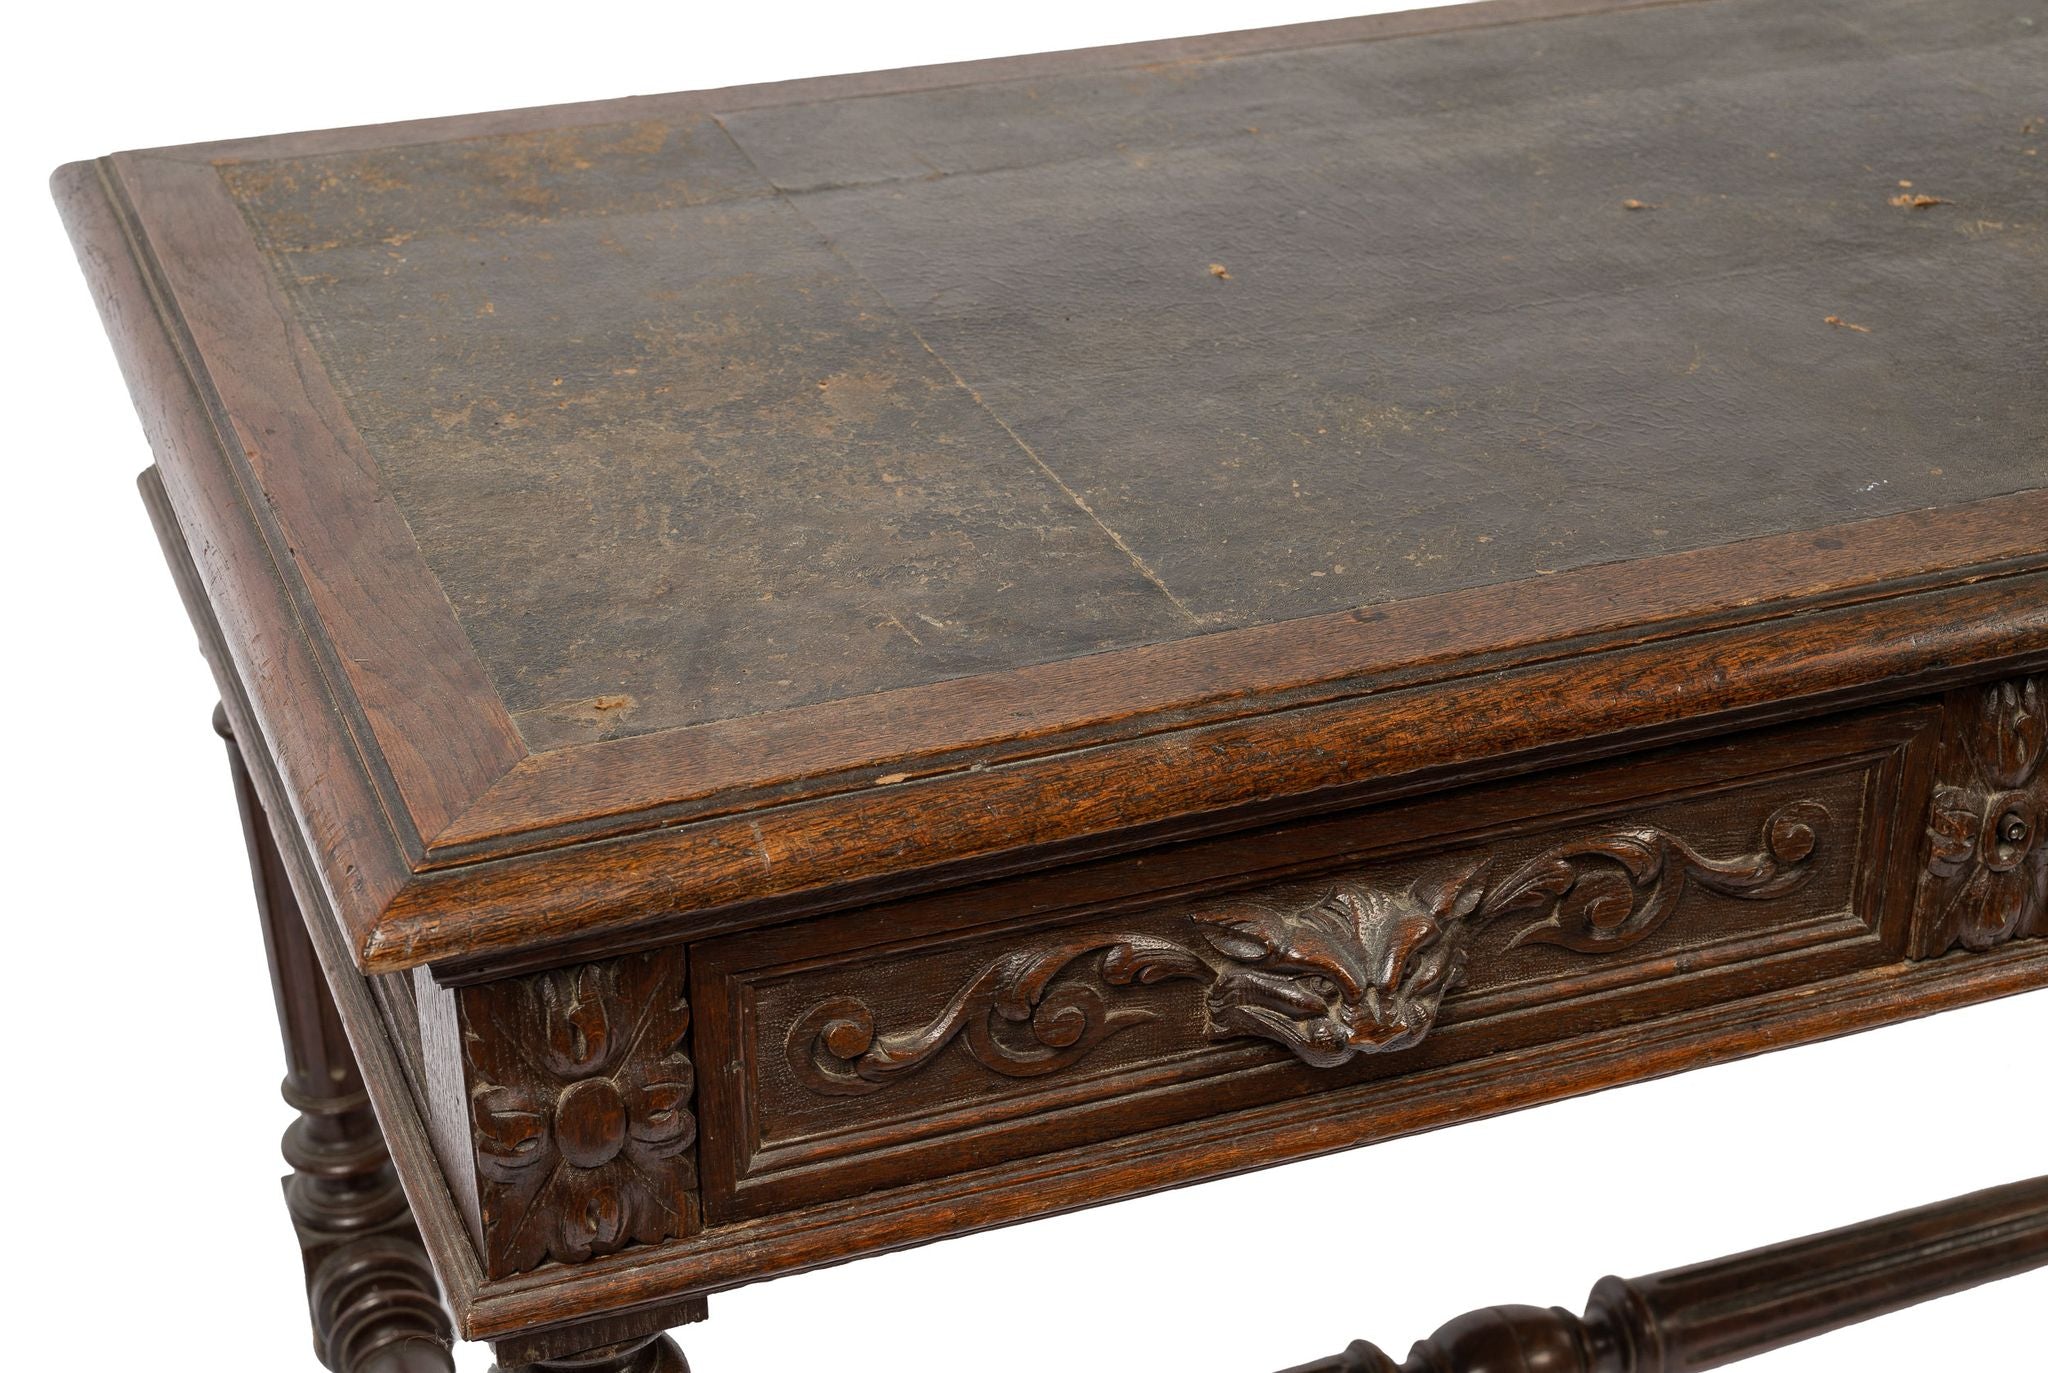 Antique French Henri II Desk with leather inlay